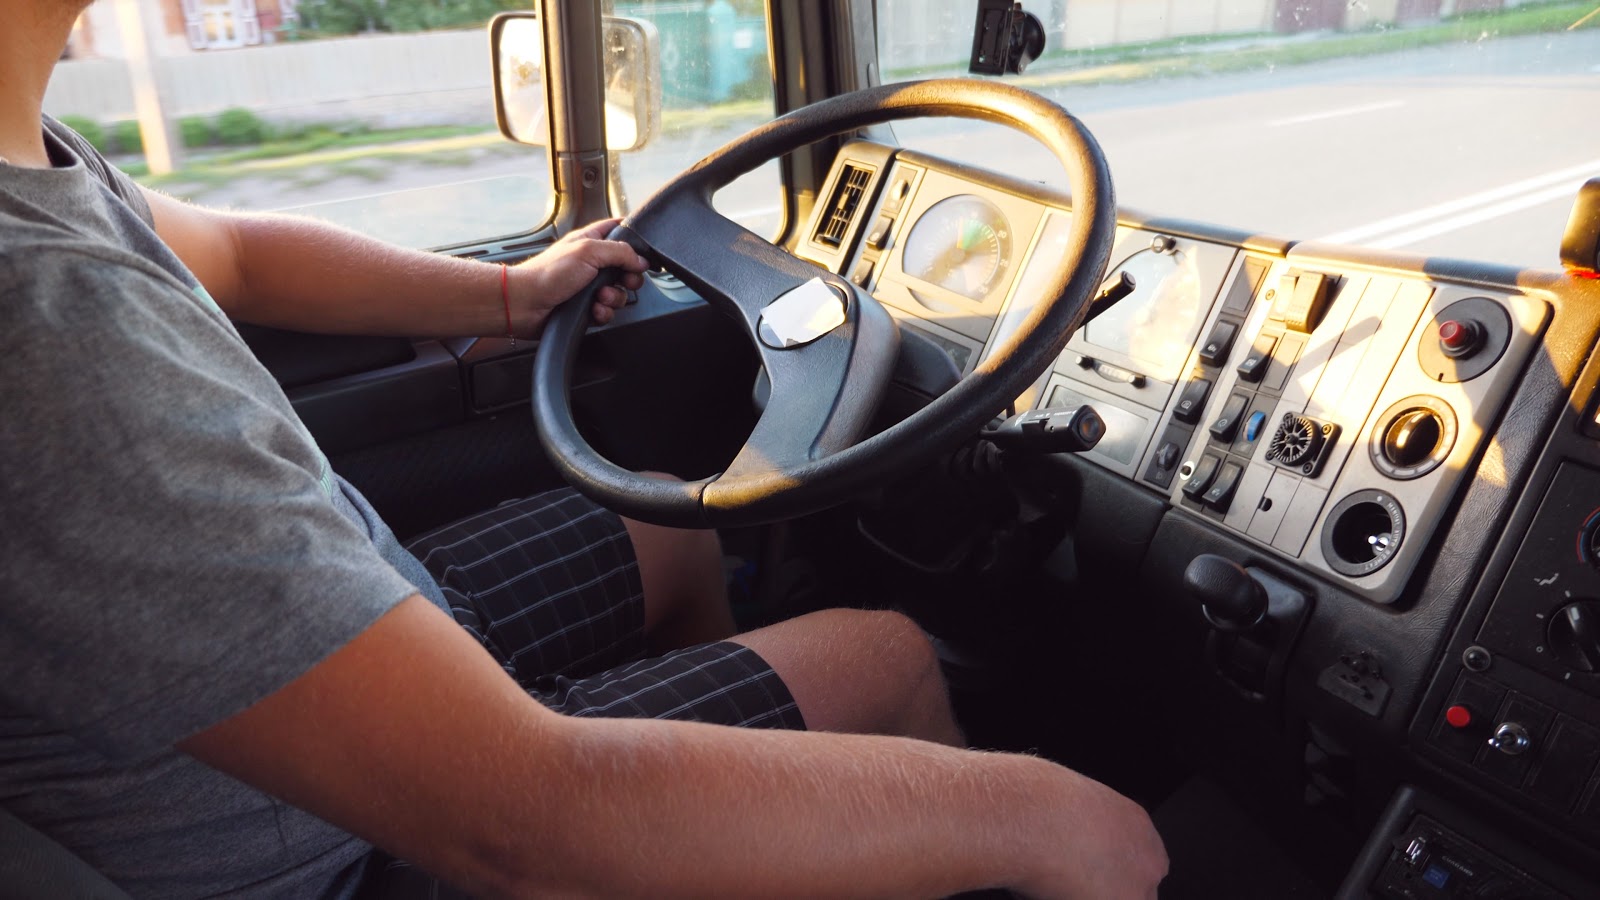 Automatic Transmissions and What They Mean for the Trucking Industry